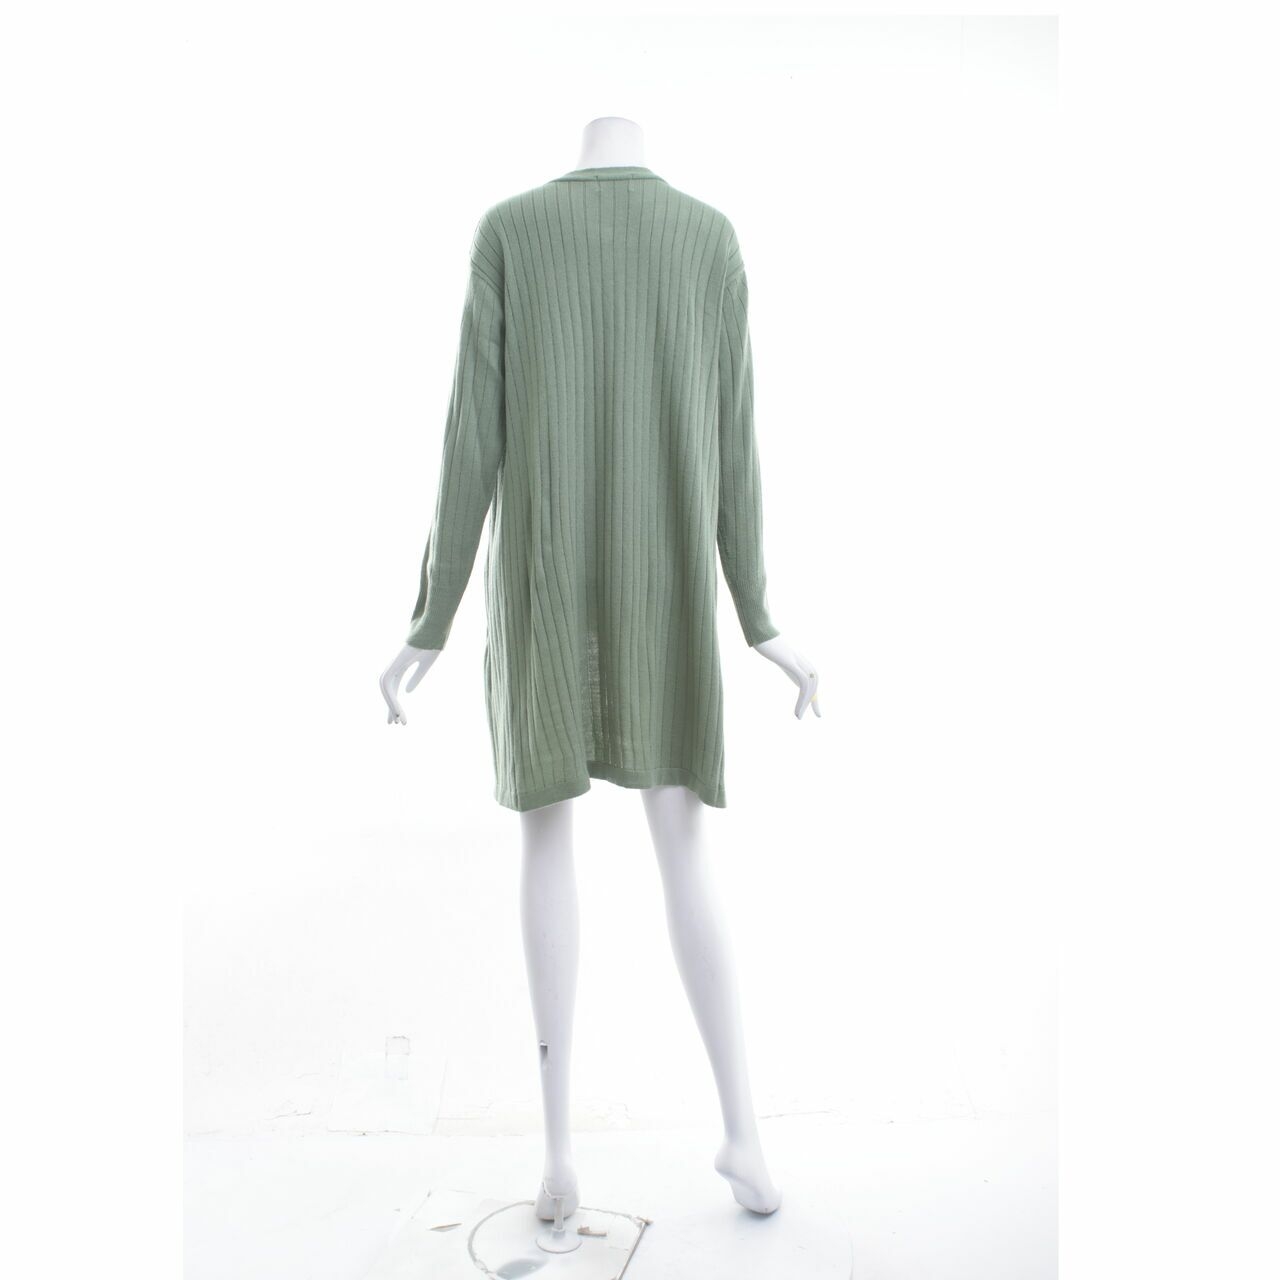 Hybrid Outfitters Green Cardigan